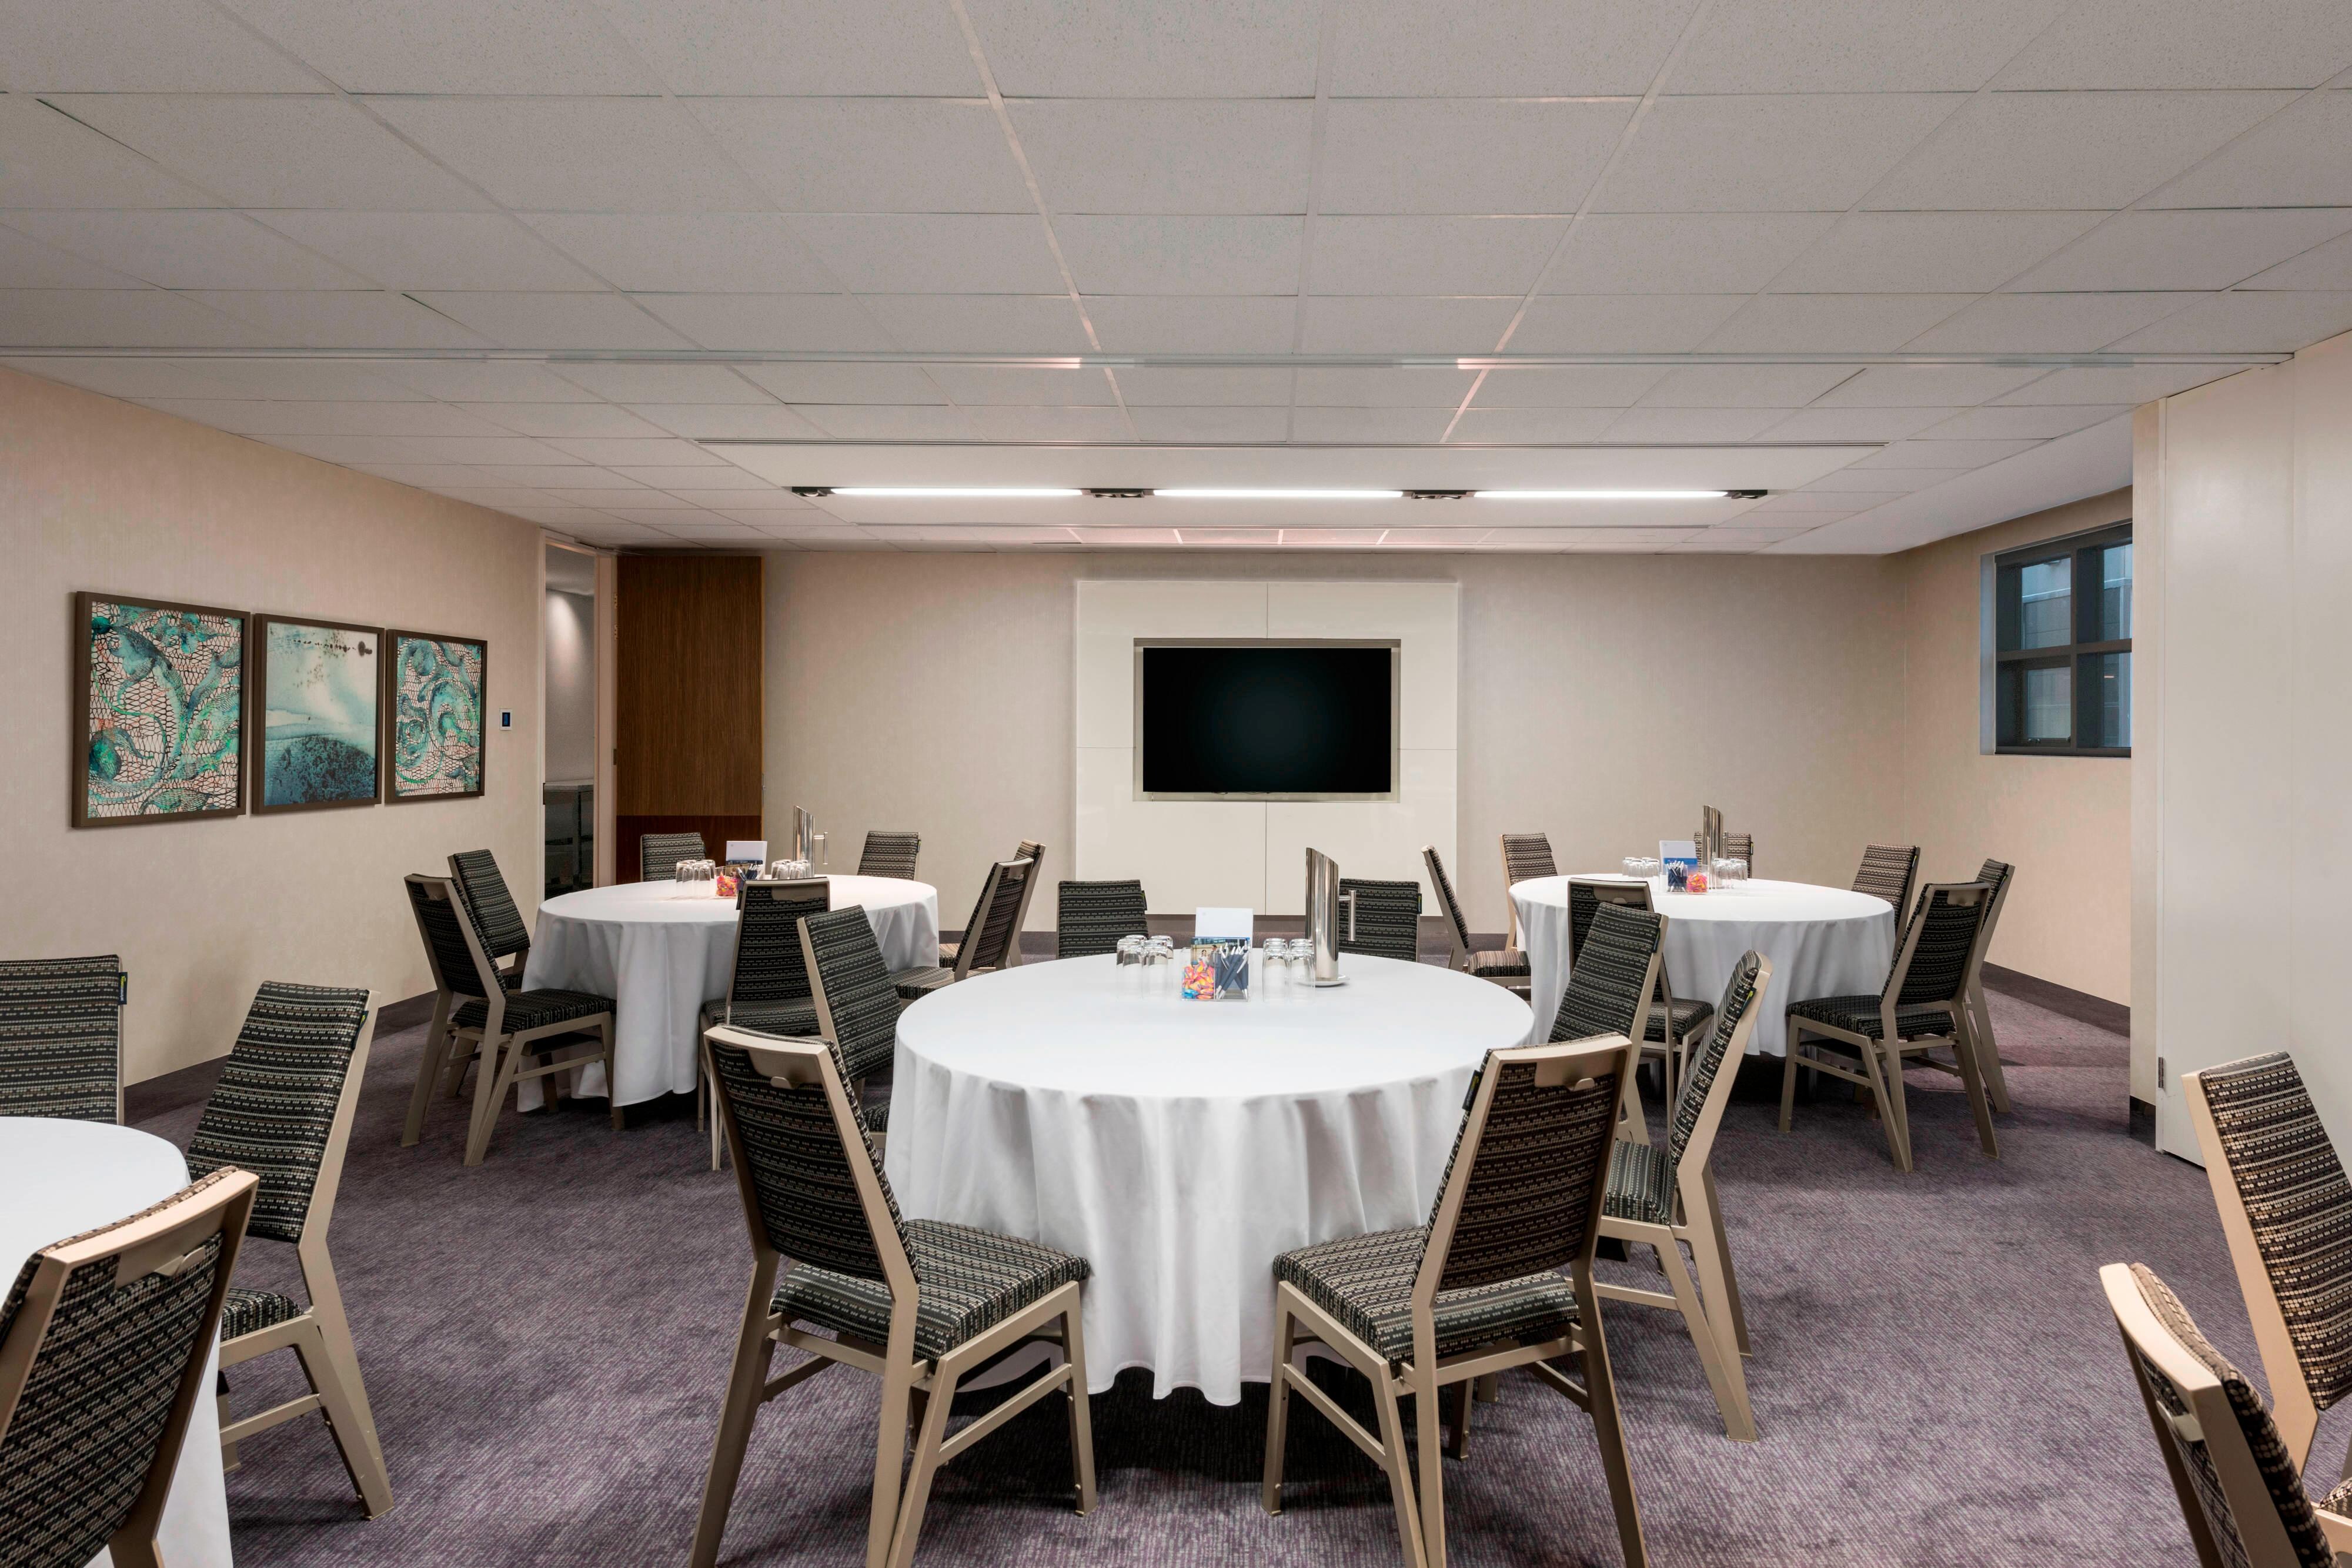 Meeting room set up with round tables and television screen